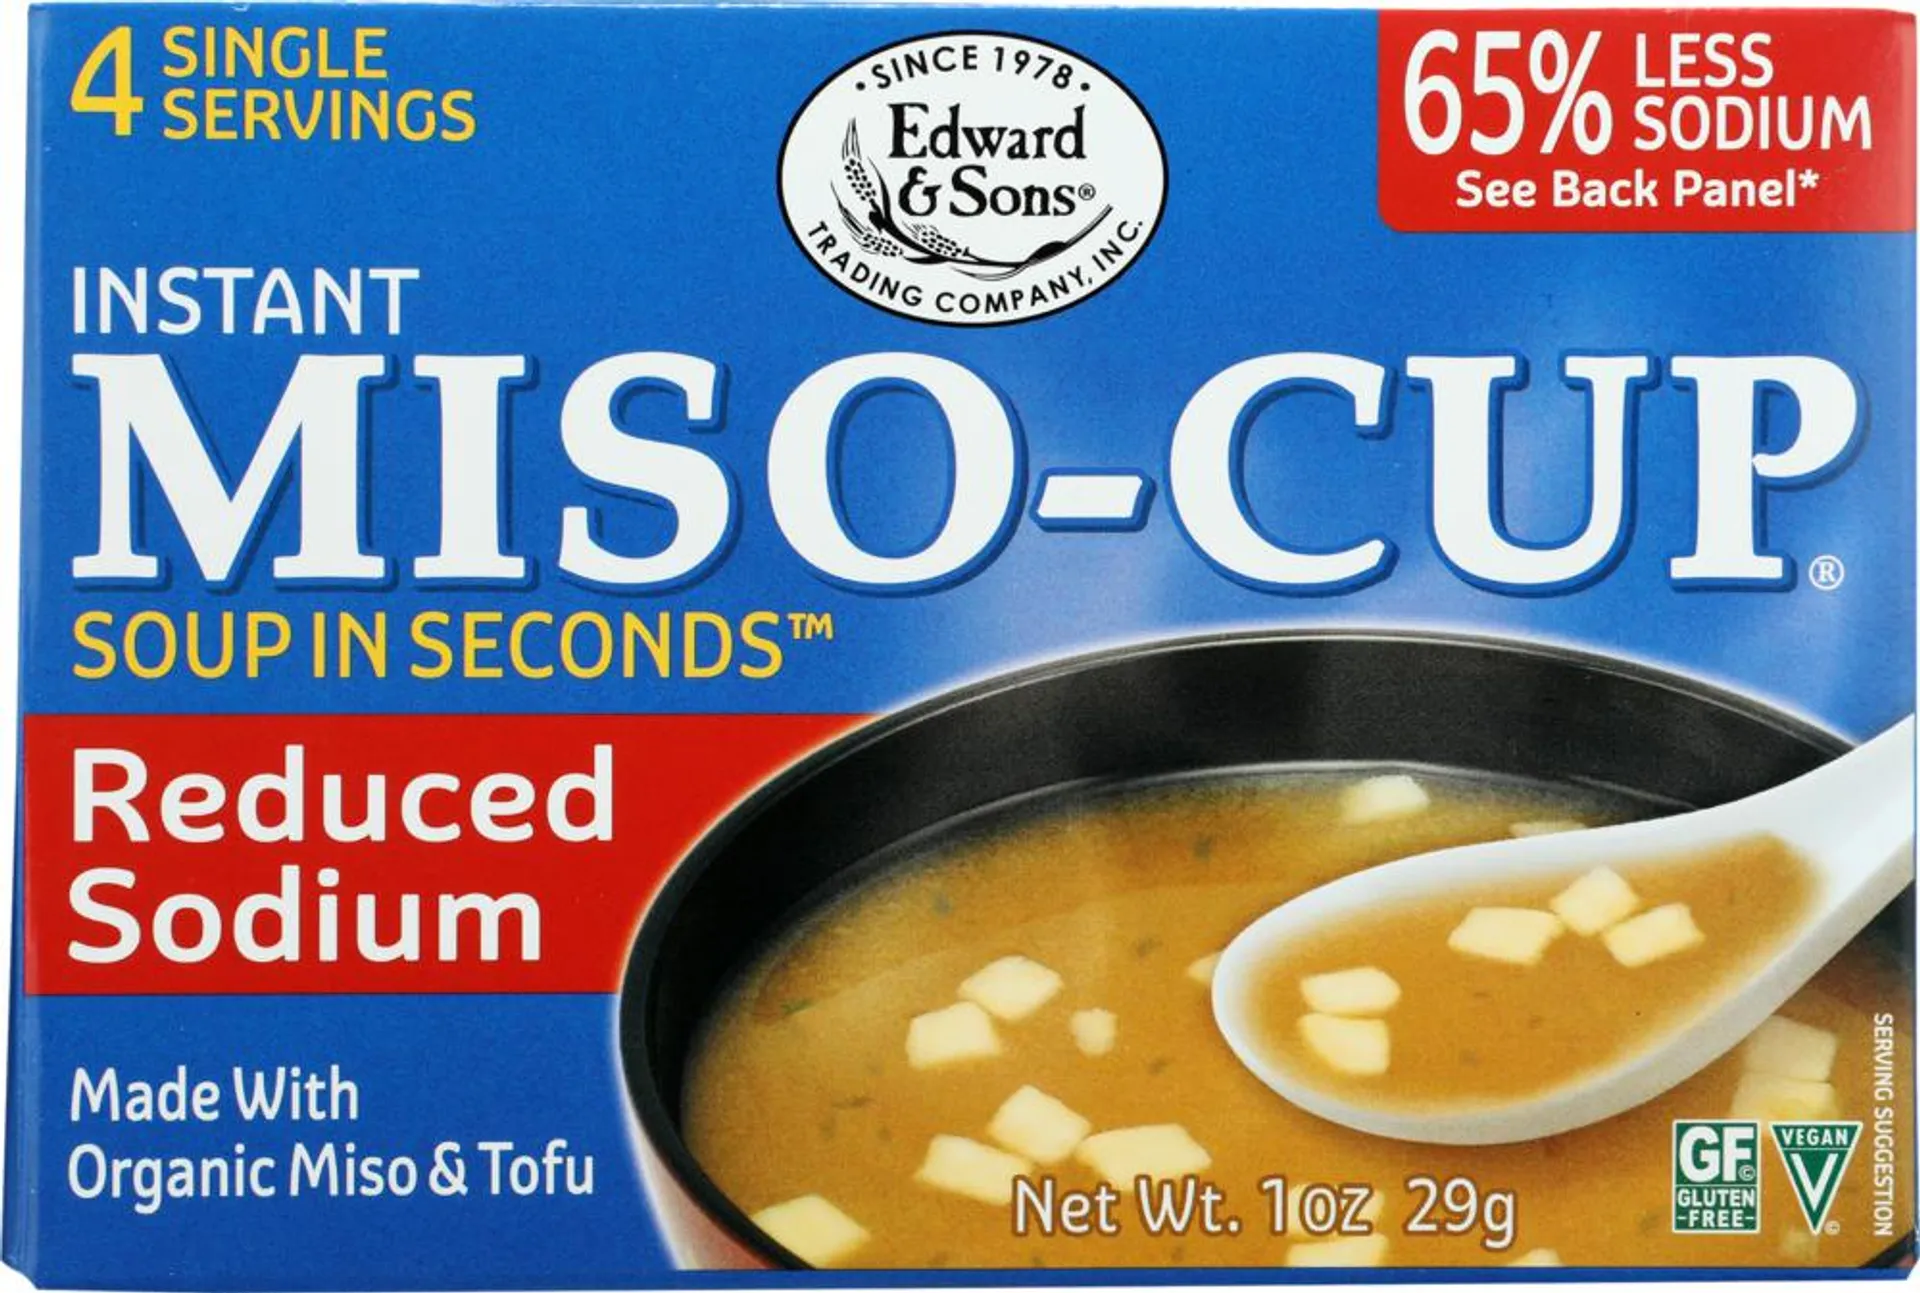 Instant Miso Cup Reduced Sodium